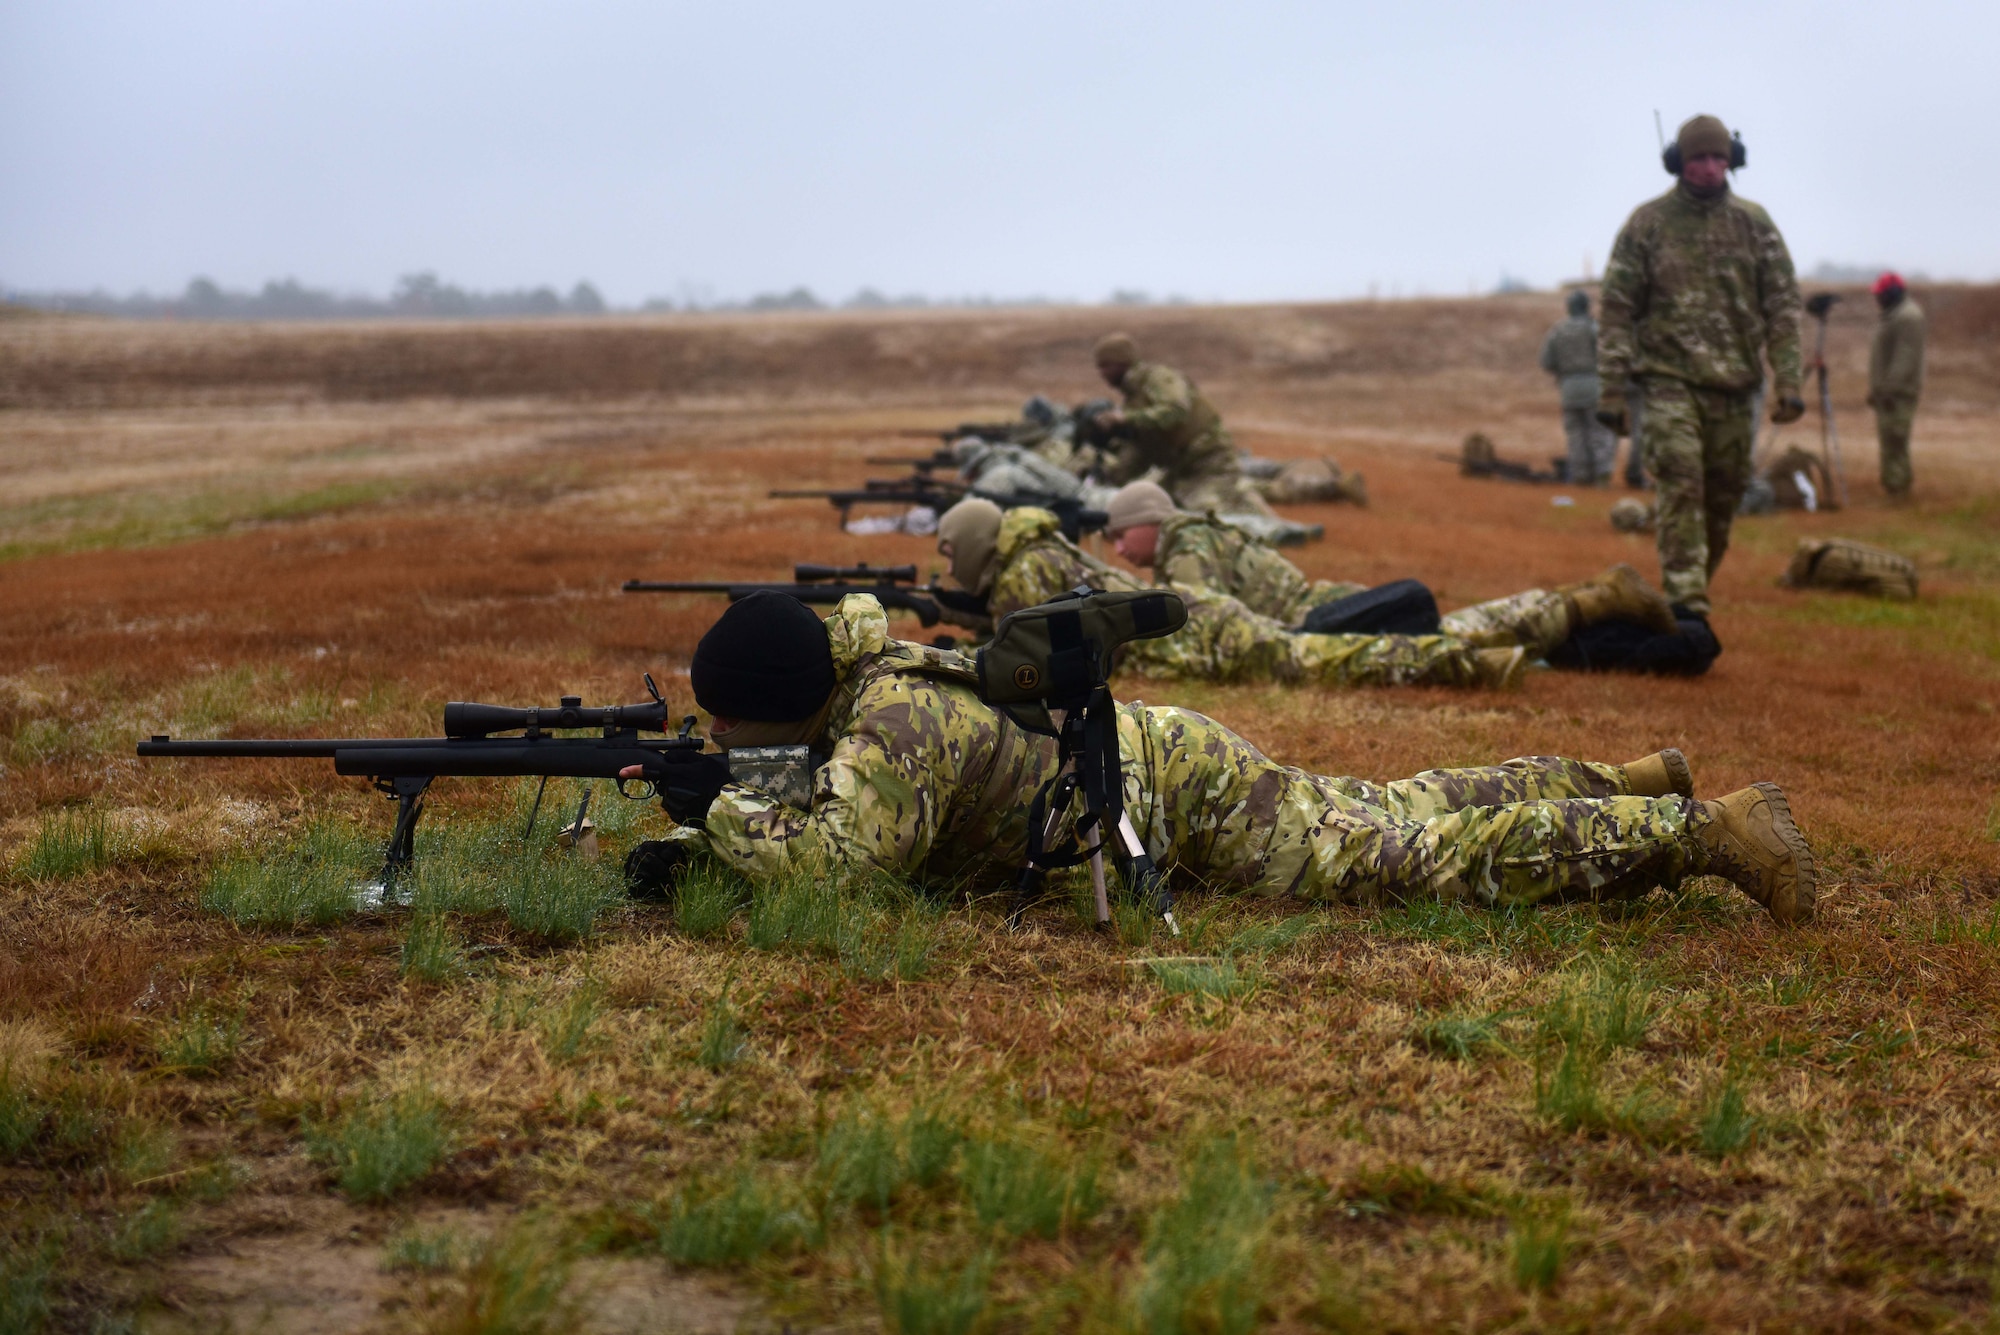 Men in military uniforms lay on ground looking down the scopes of M24 sniper weapon systems at a shooting range.